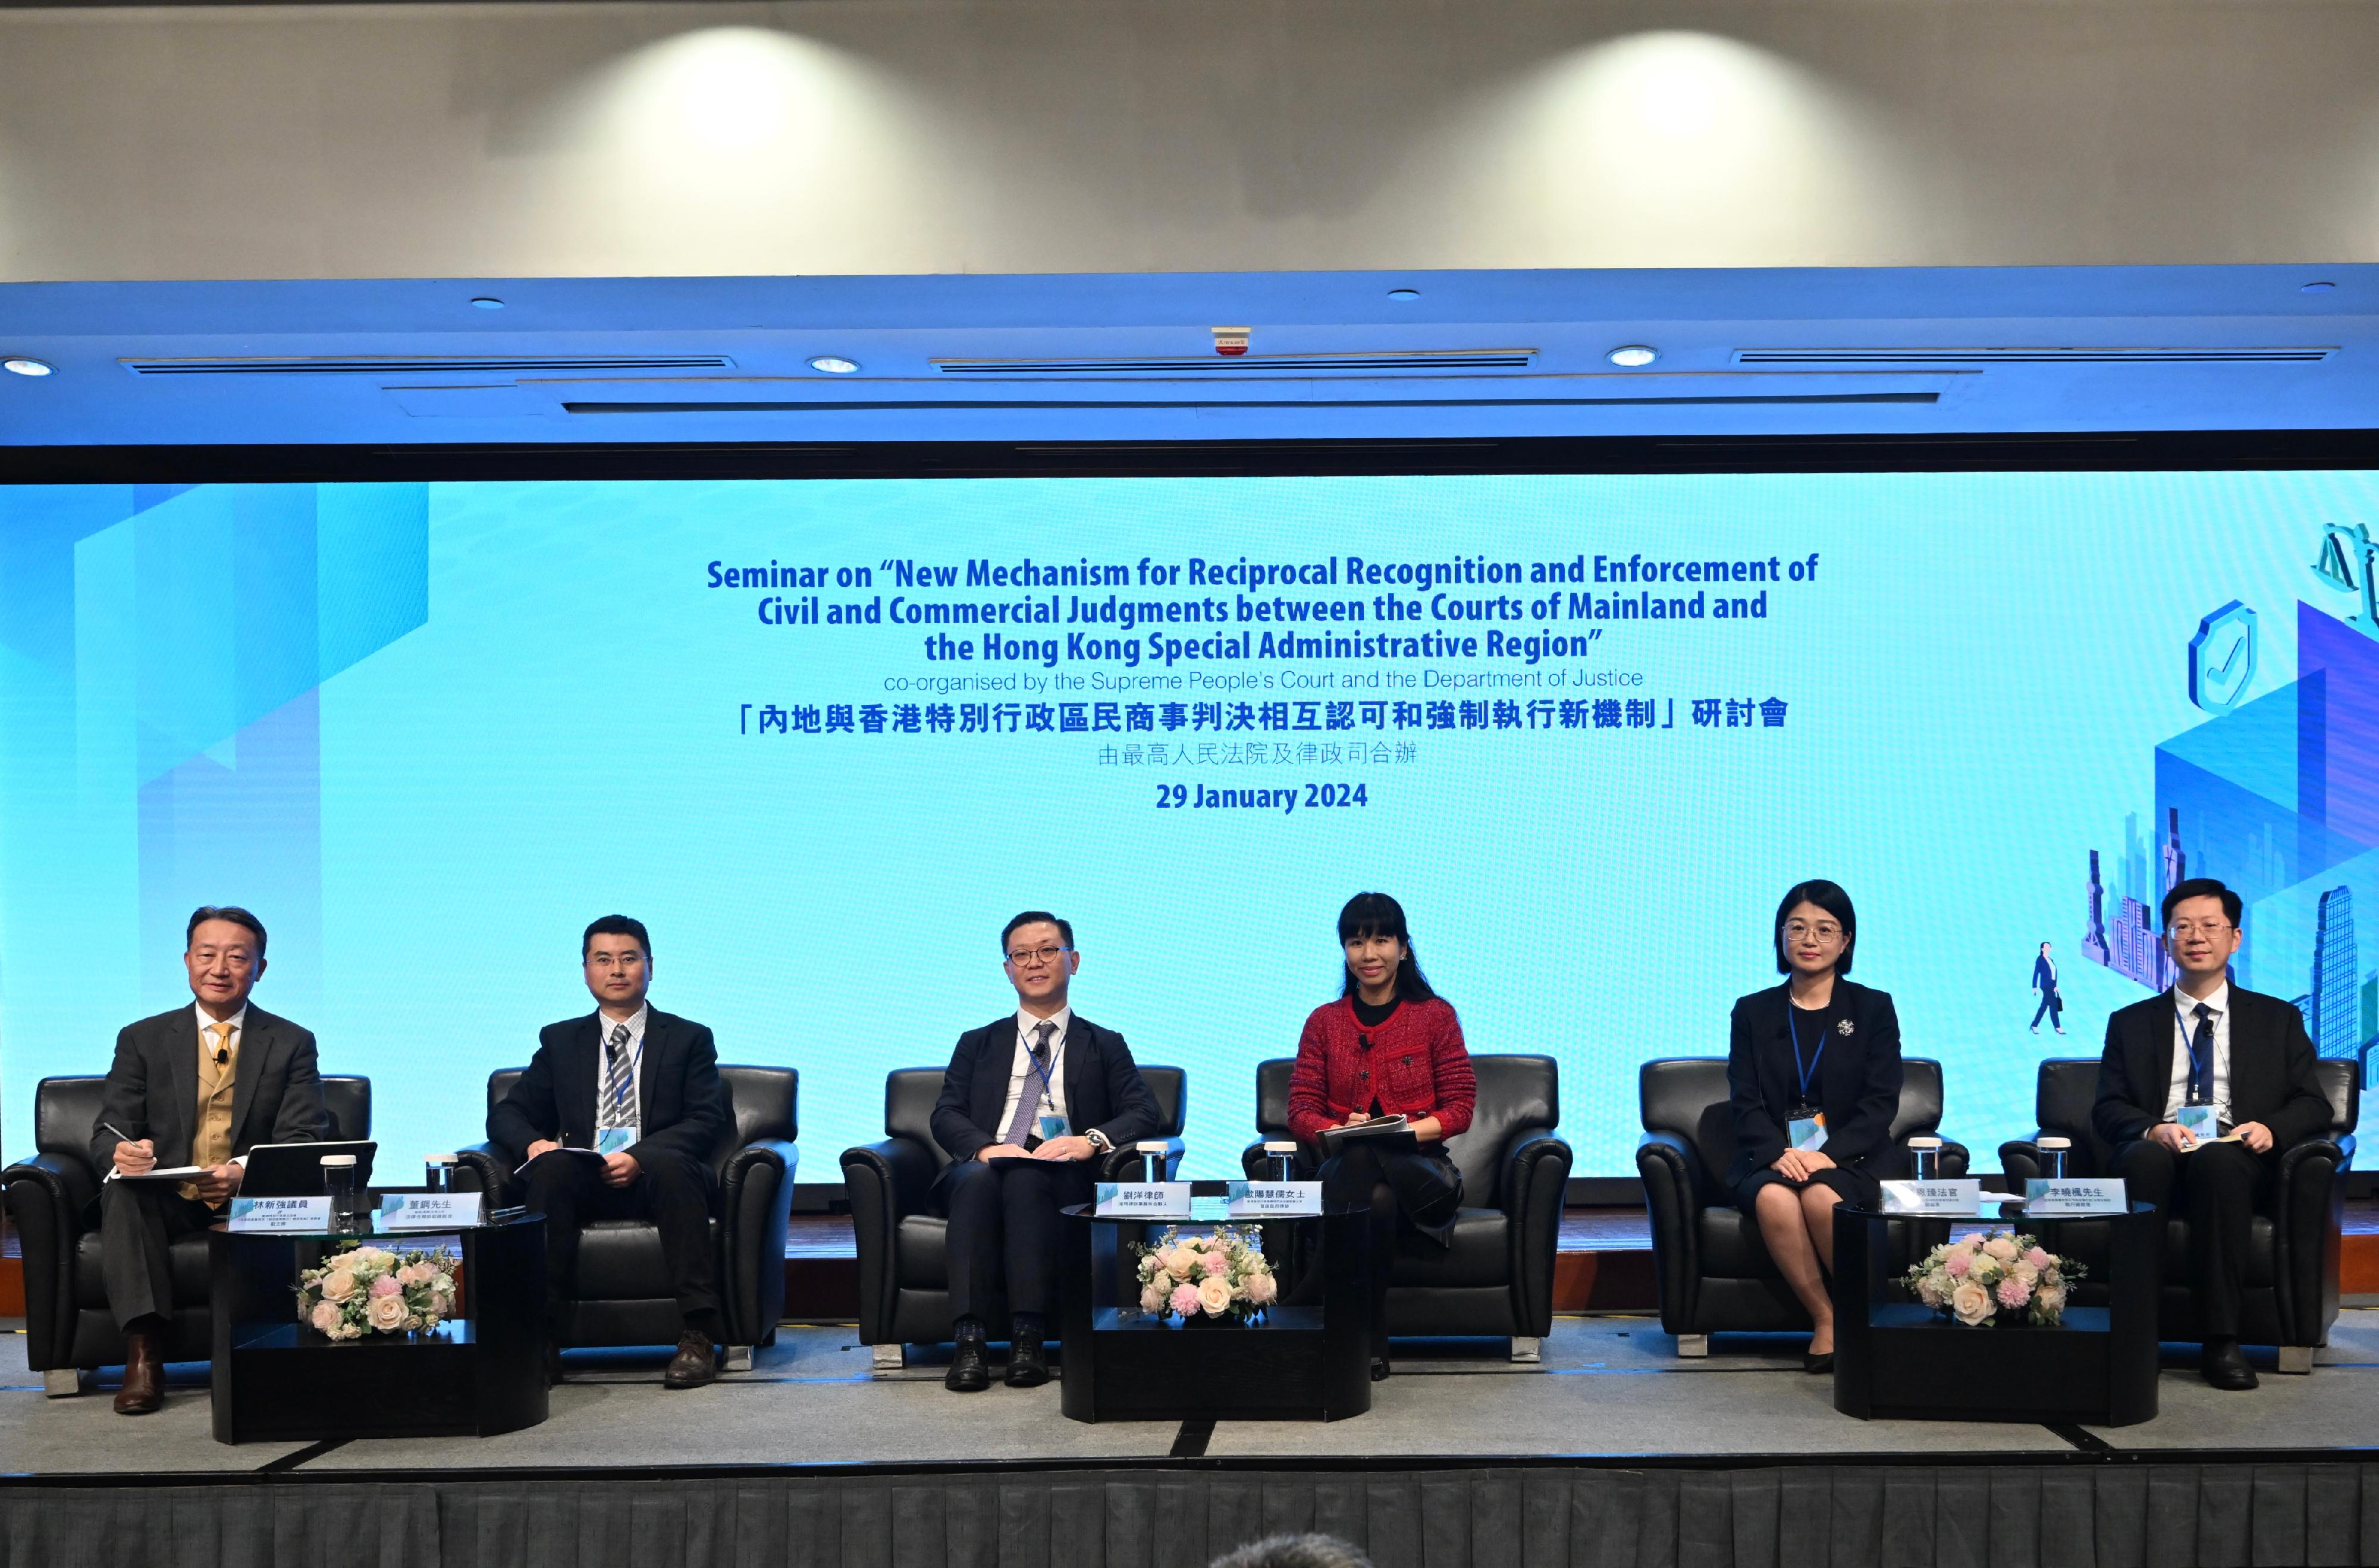 The seminar on "New Mechanism for Reciprocal Recognition and Enforcement of Civil and Commercial Judgments between the Courts of Mainland and the Hong Kong Special Administrative Region" co-organised by the Supreme People's Court (SPC) and the Department of Justice (DoJ) was held today (January 29). Photo shows (from left) the Deputy Chairman of the Bills Committee on Mainland Judgments in Civil and Commercial Matters (Reciprocal Enforcement) Bill of the Legislative Council, Mr Ambrose Lam; Deputy Group General Counsel of China Resources (Holdings) Company Limited Mr Dong Gang; Partner of Haiwen & Partners Mr Edward Liu; Principal Government Counsel of the Legal Enhancement and Development Office of the DoJ Ms Peggy Au-yeung; Deputy Chief Judge of the Fourth Civil Division of Guangdong High People's Court Judge Gu Enzhen; and the General Executive Manager of the Risk Management and Audit Department/Legal Compliance Department of China Merchants Group Limited, Mr Li Xiaofeng, at the Panel discussion 3: Significance and safeguards of the Arrangement.